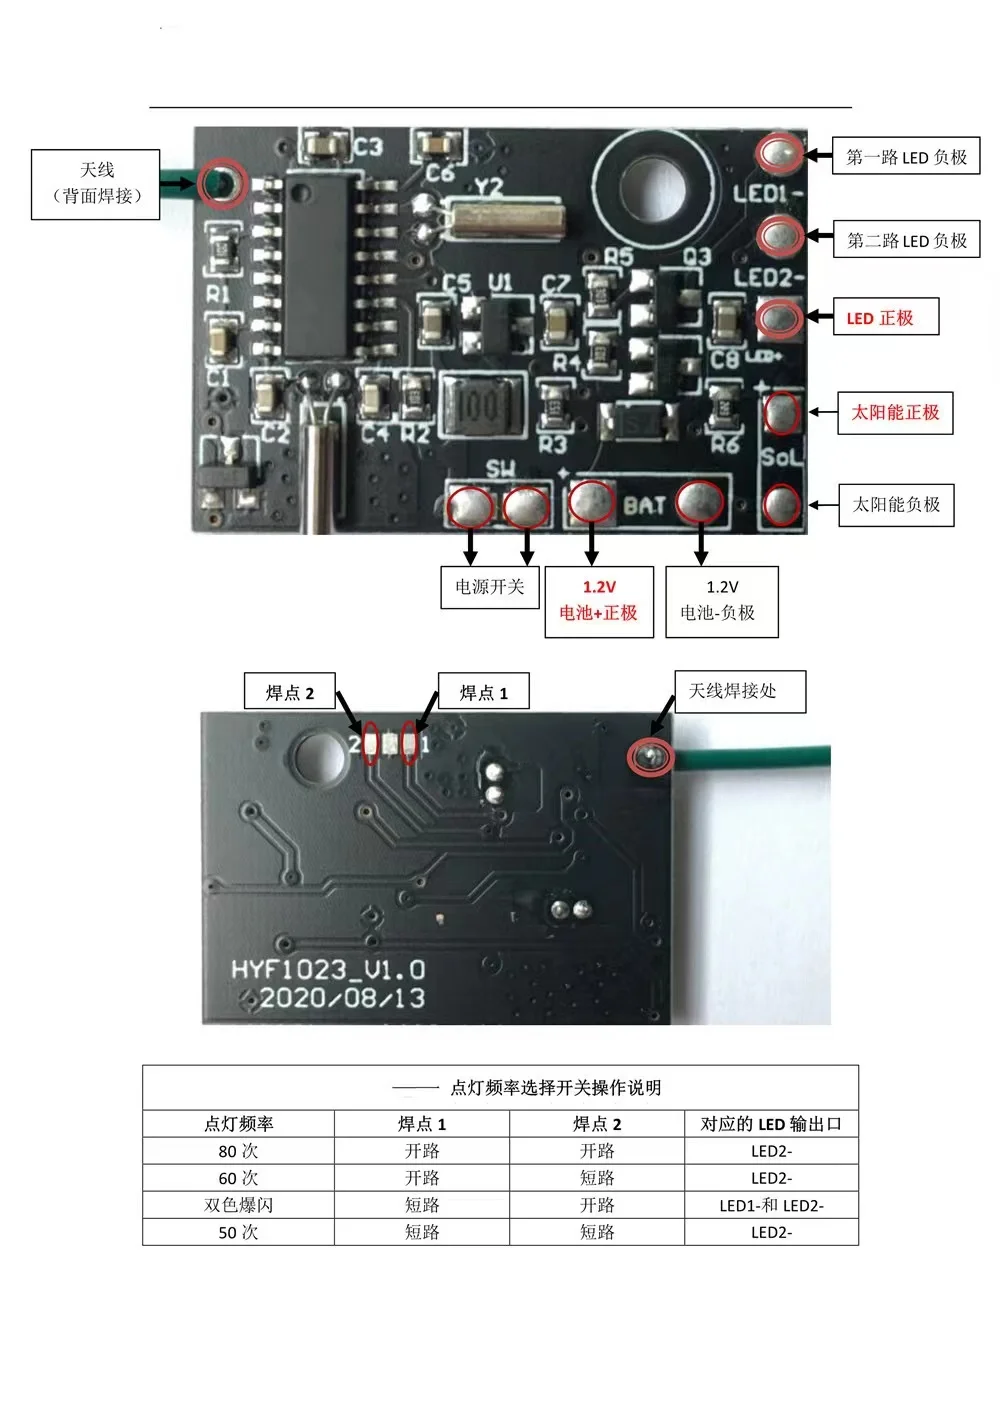 Common PCB board specifications